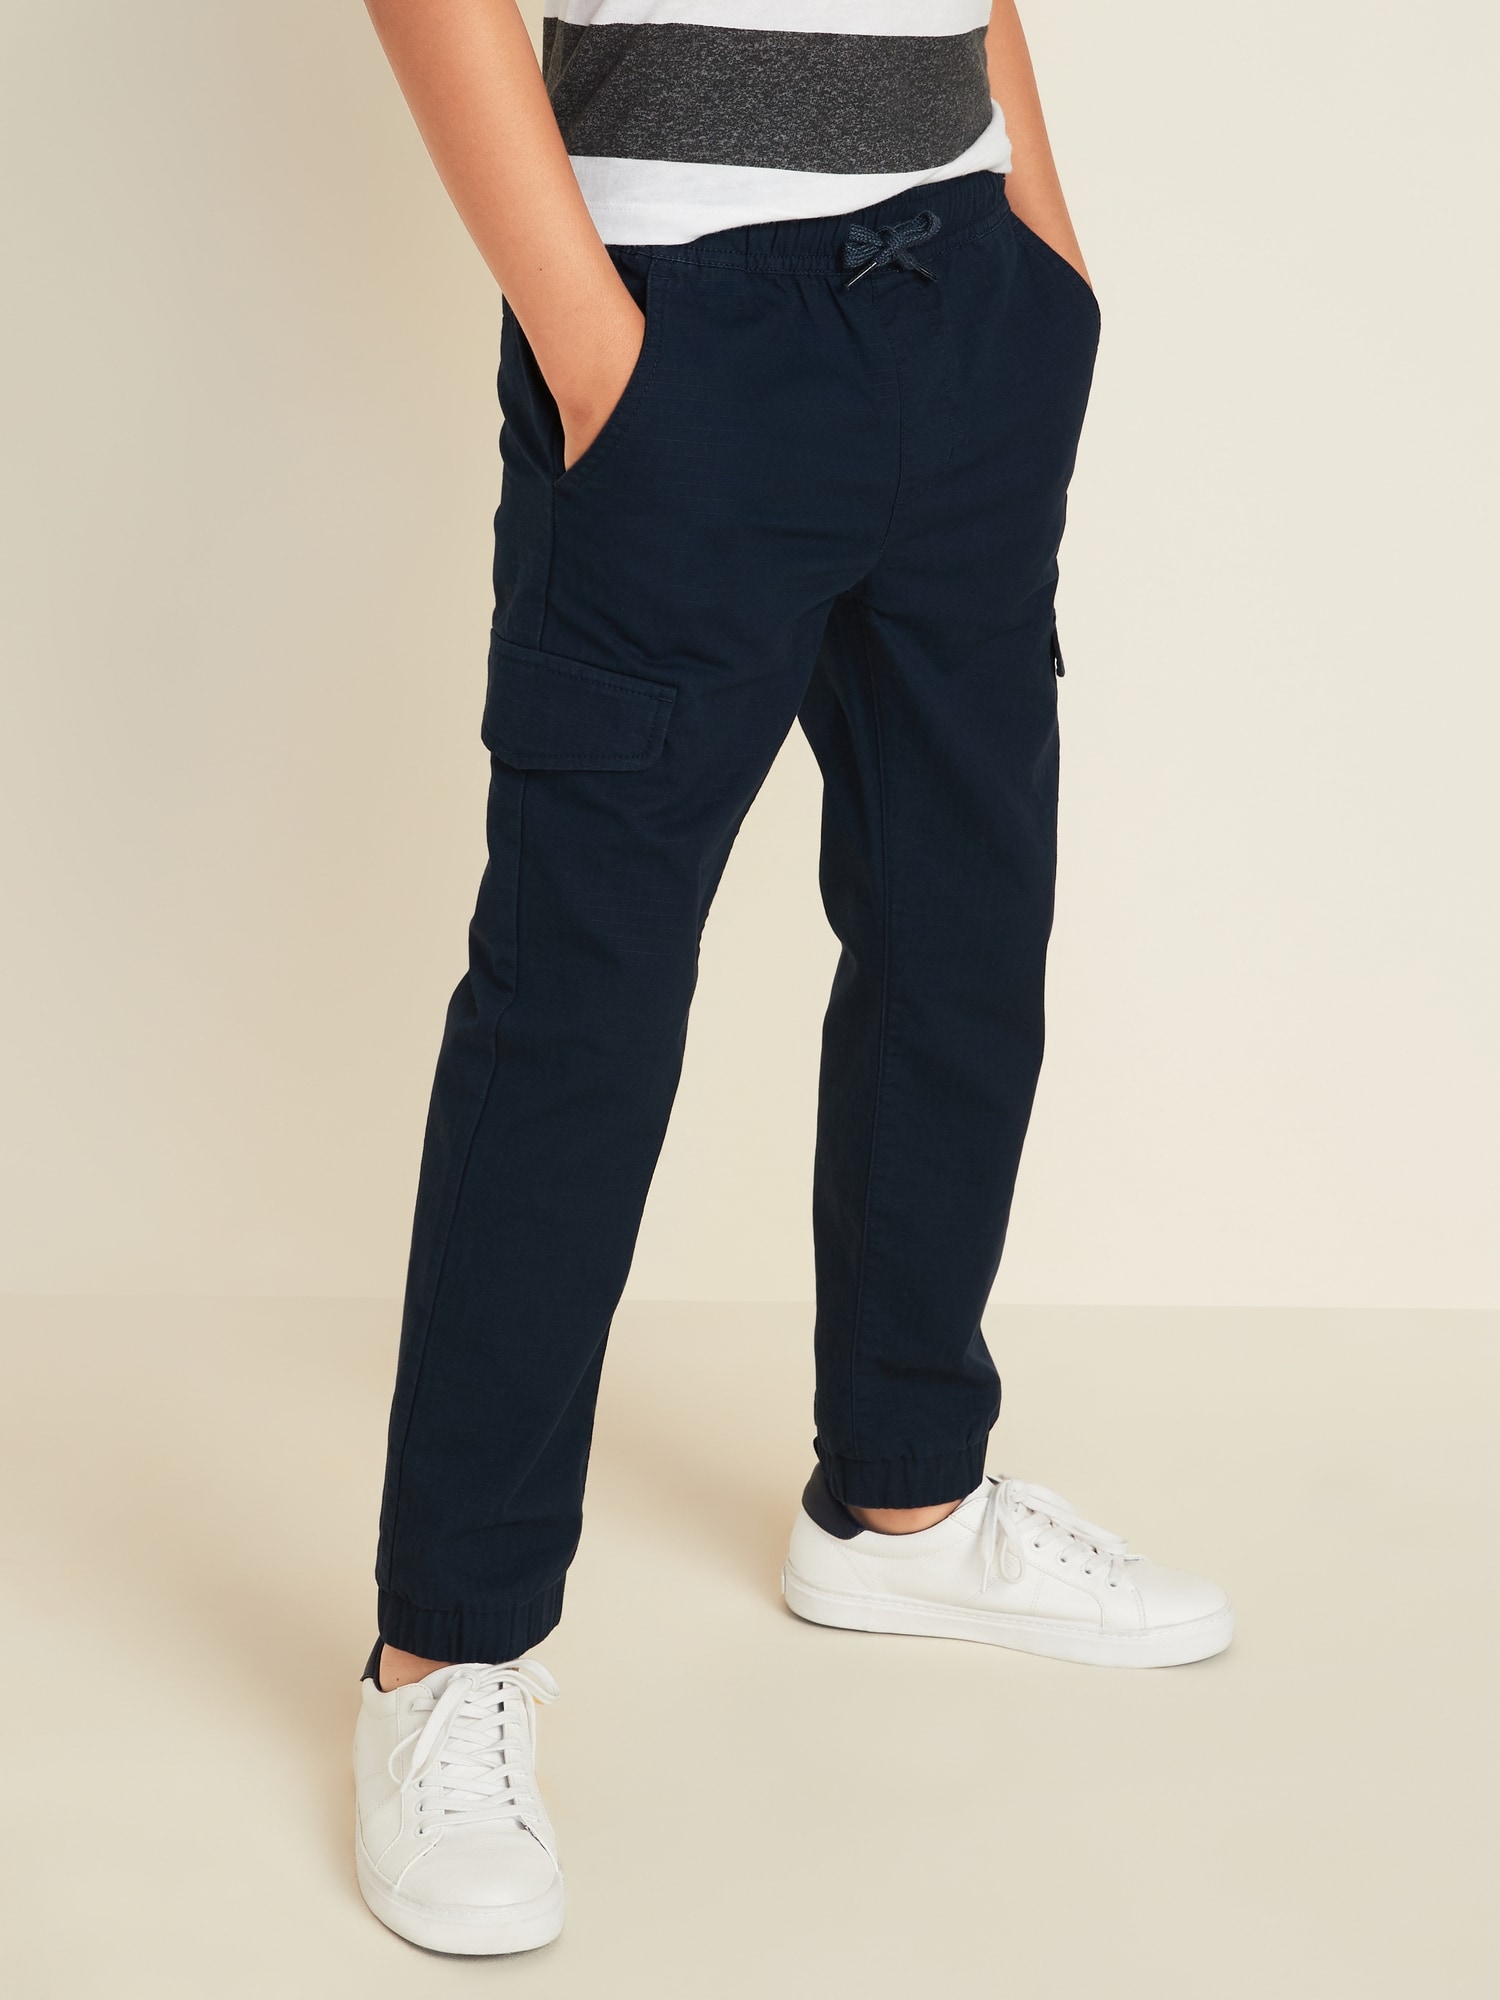 My Casual Mom - 🎉TODAY ONLY!! The always popular $12 Linen pants sale at OLD  NAVY! -https://rstyle.me/+Jh6ELo7_AIYbEmYgMazhpA ***commissioned links Xo,  Brooke | Facebook